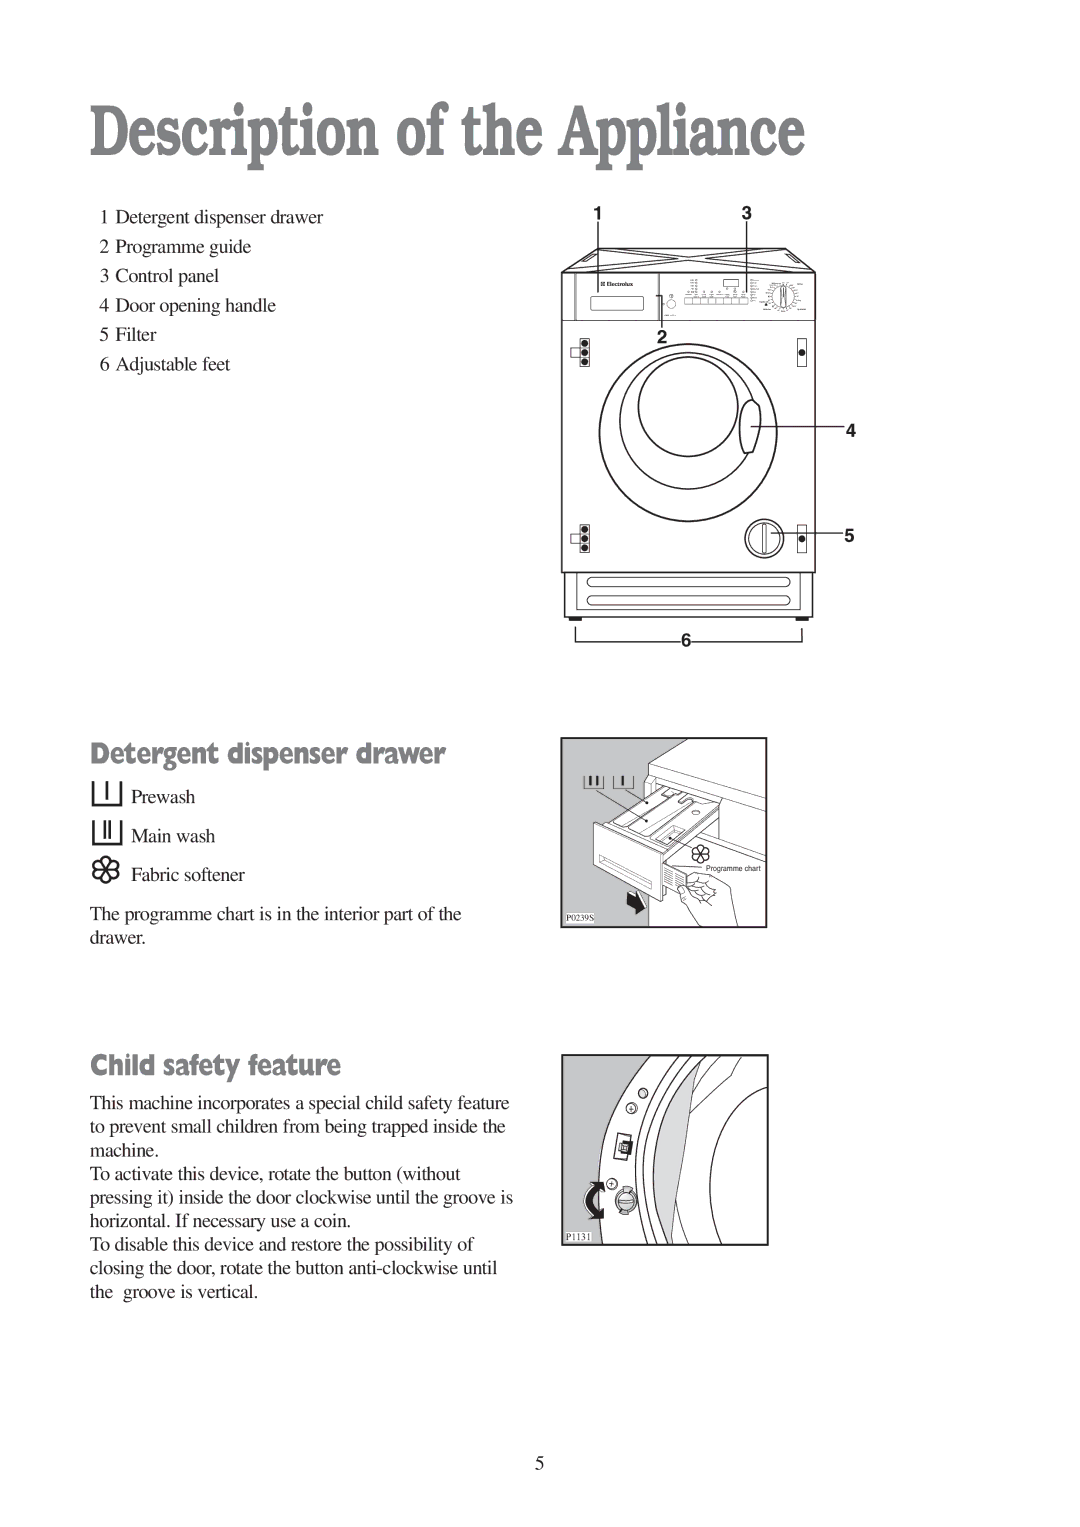 Electrolux EWD 1409 I manual Description of the Appliance, Detergent dispenser drawer, Child safety feature 